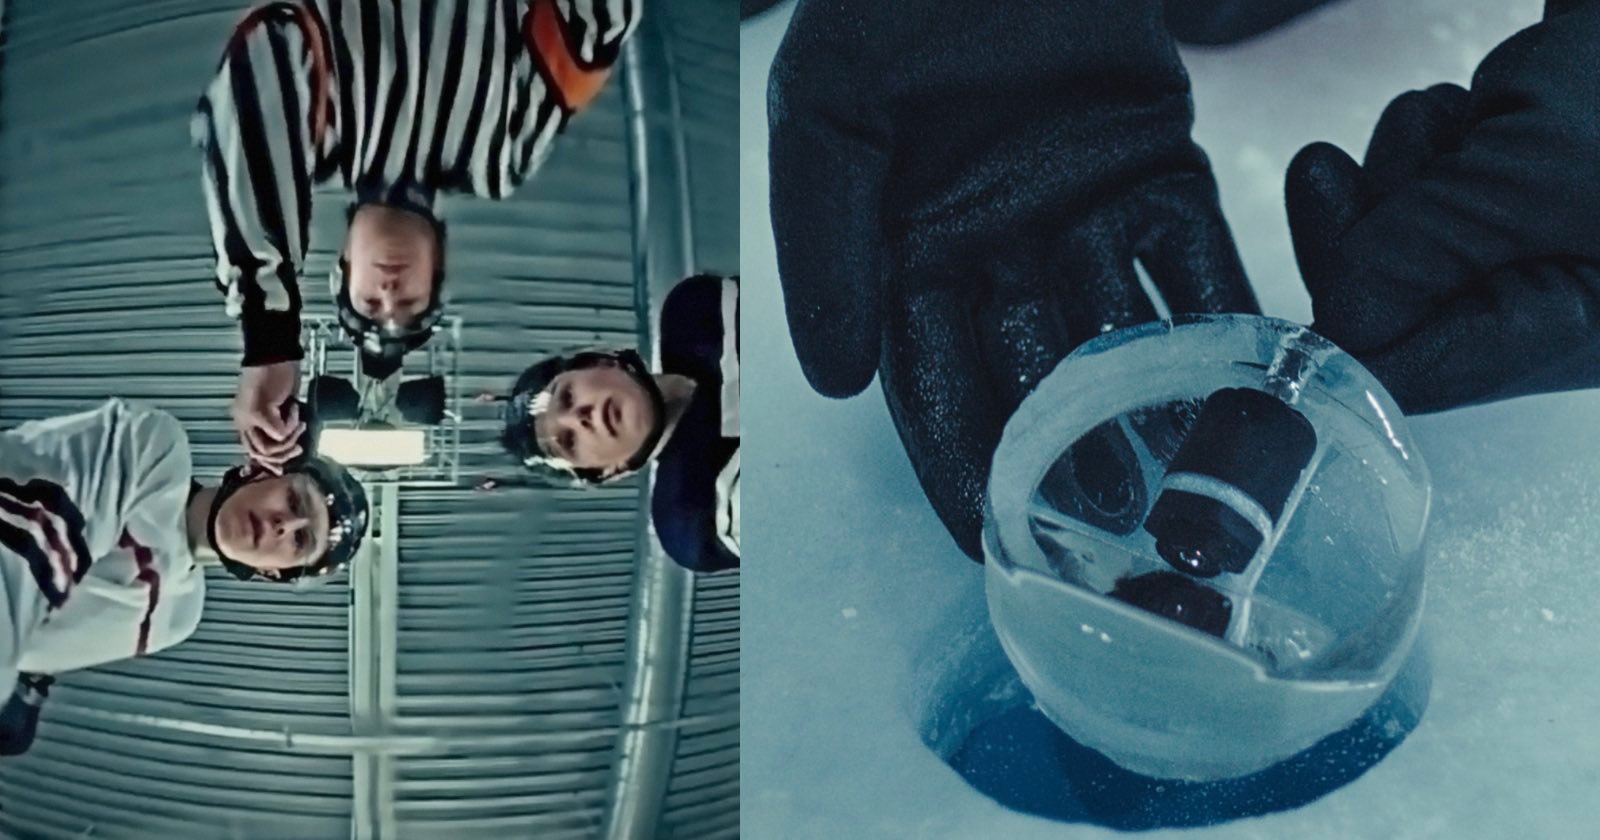 Engineers Freeze Camera Below Ice Hockey Rink to Capture Impossible Angle